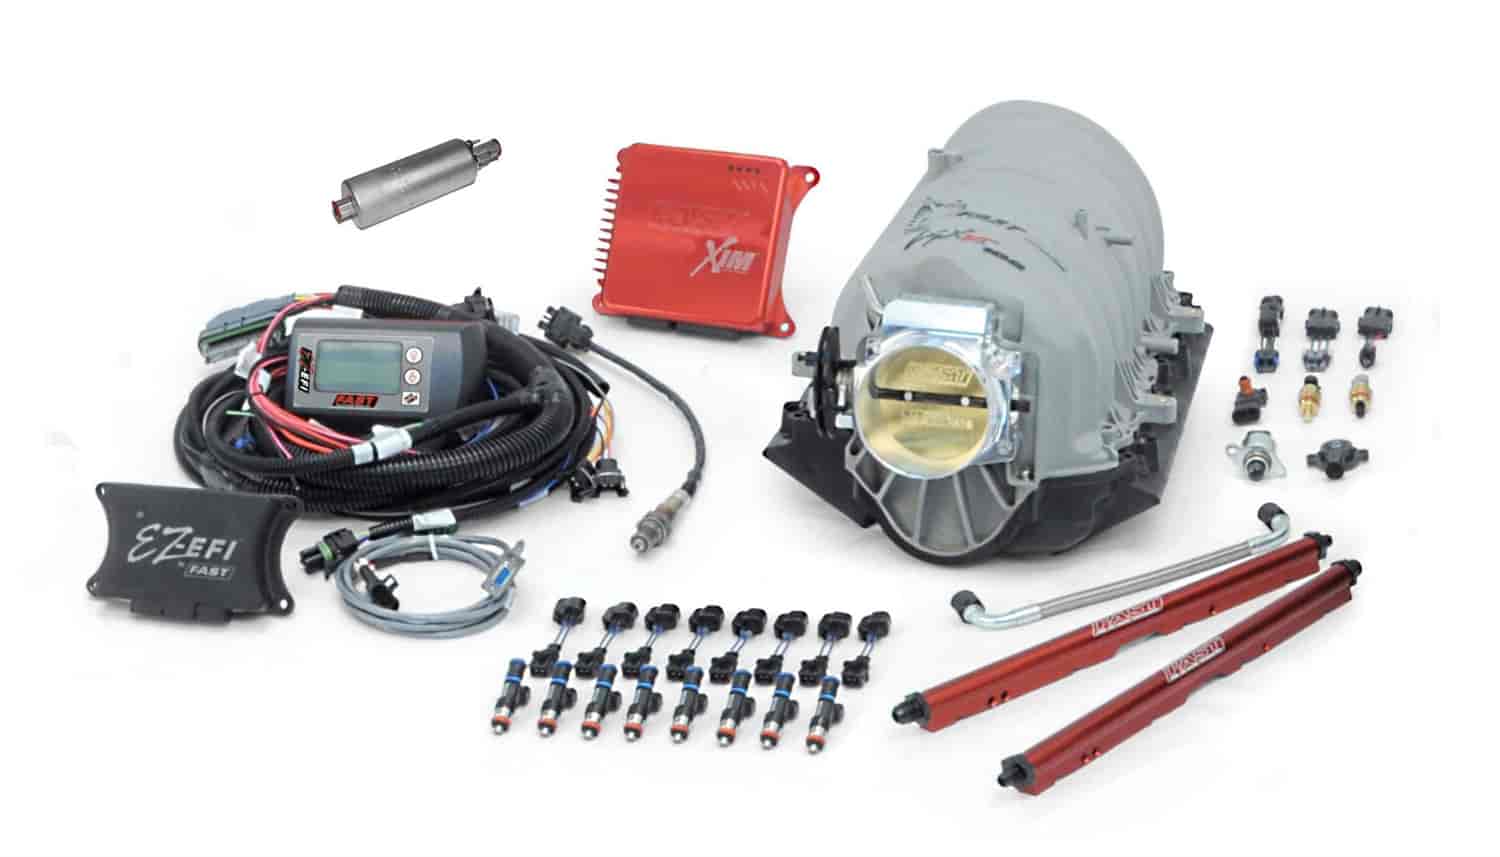 EZ-EFI Engine Kit with LSXRT Intake Manifold Includes In-Tank Fuel Pump